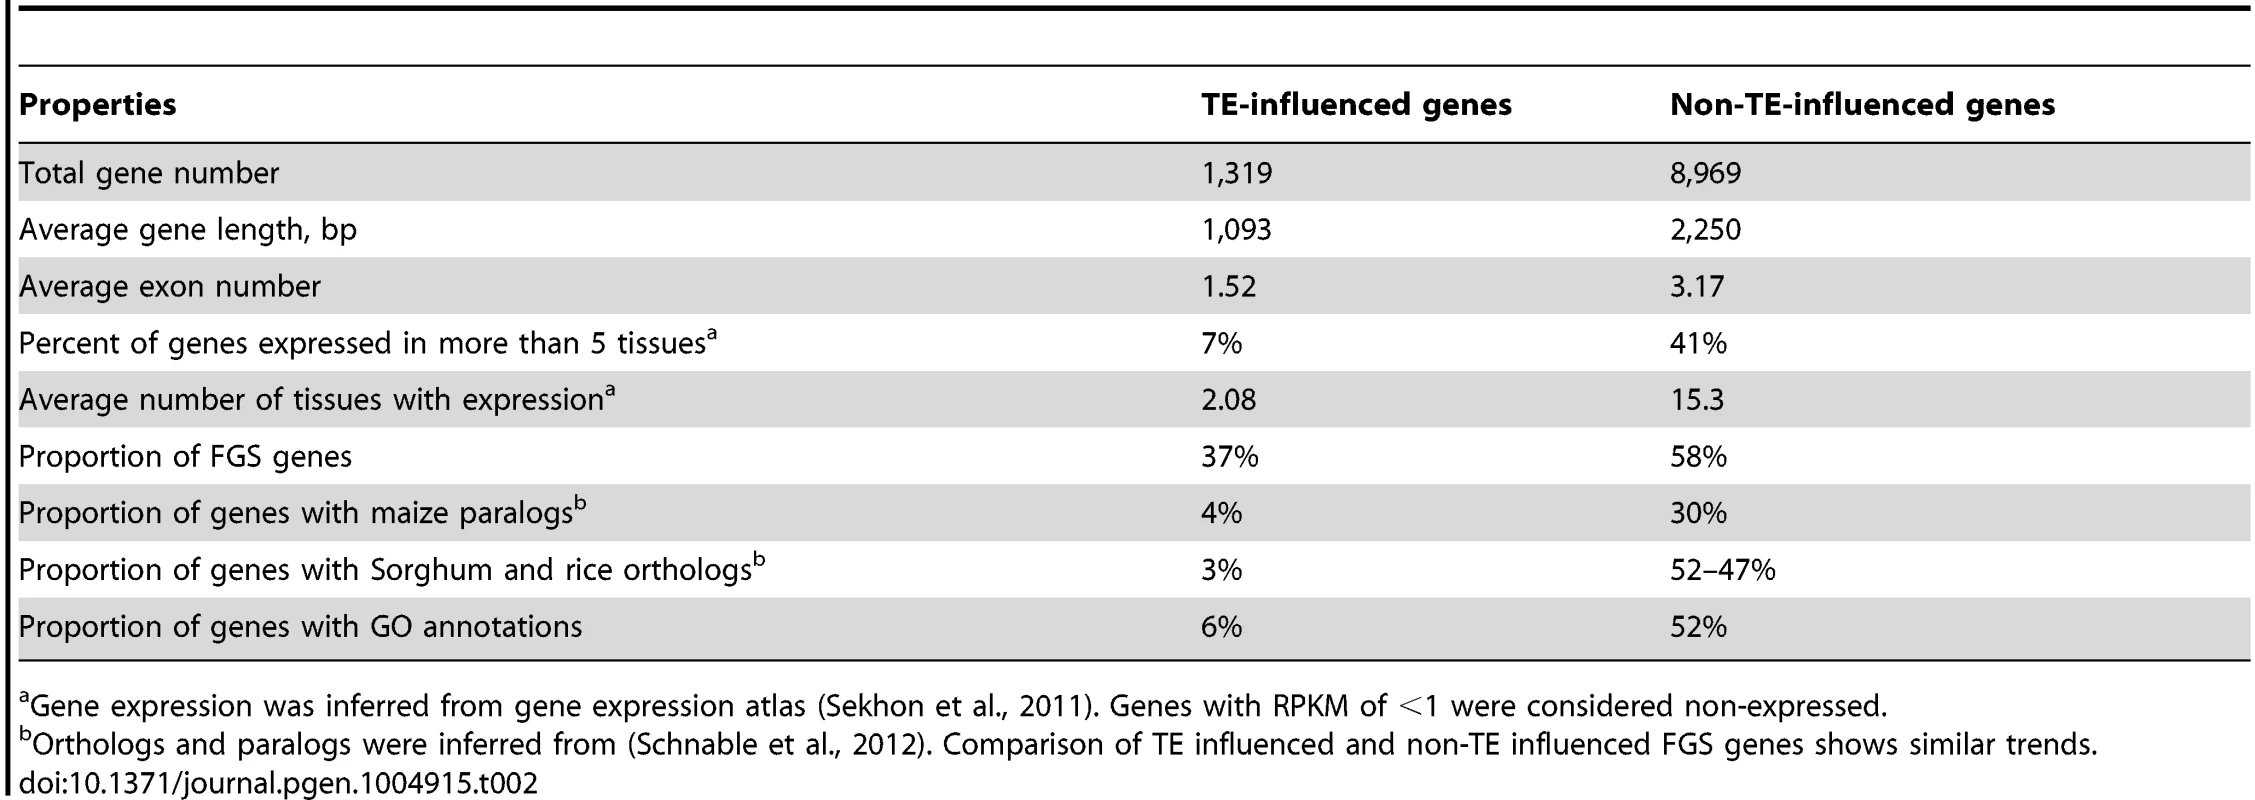 Comparison of TE-influenced and non-TE-influenced WGS genes up-regulated in abiotic stress.